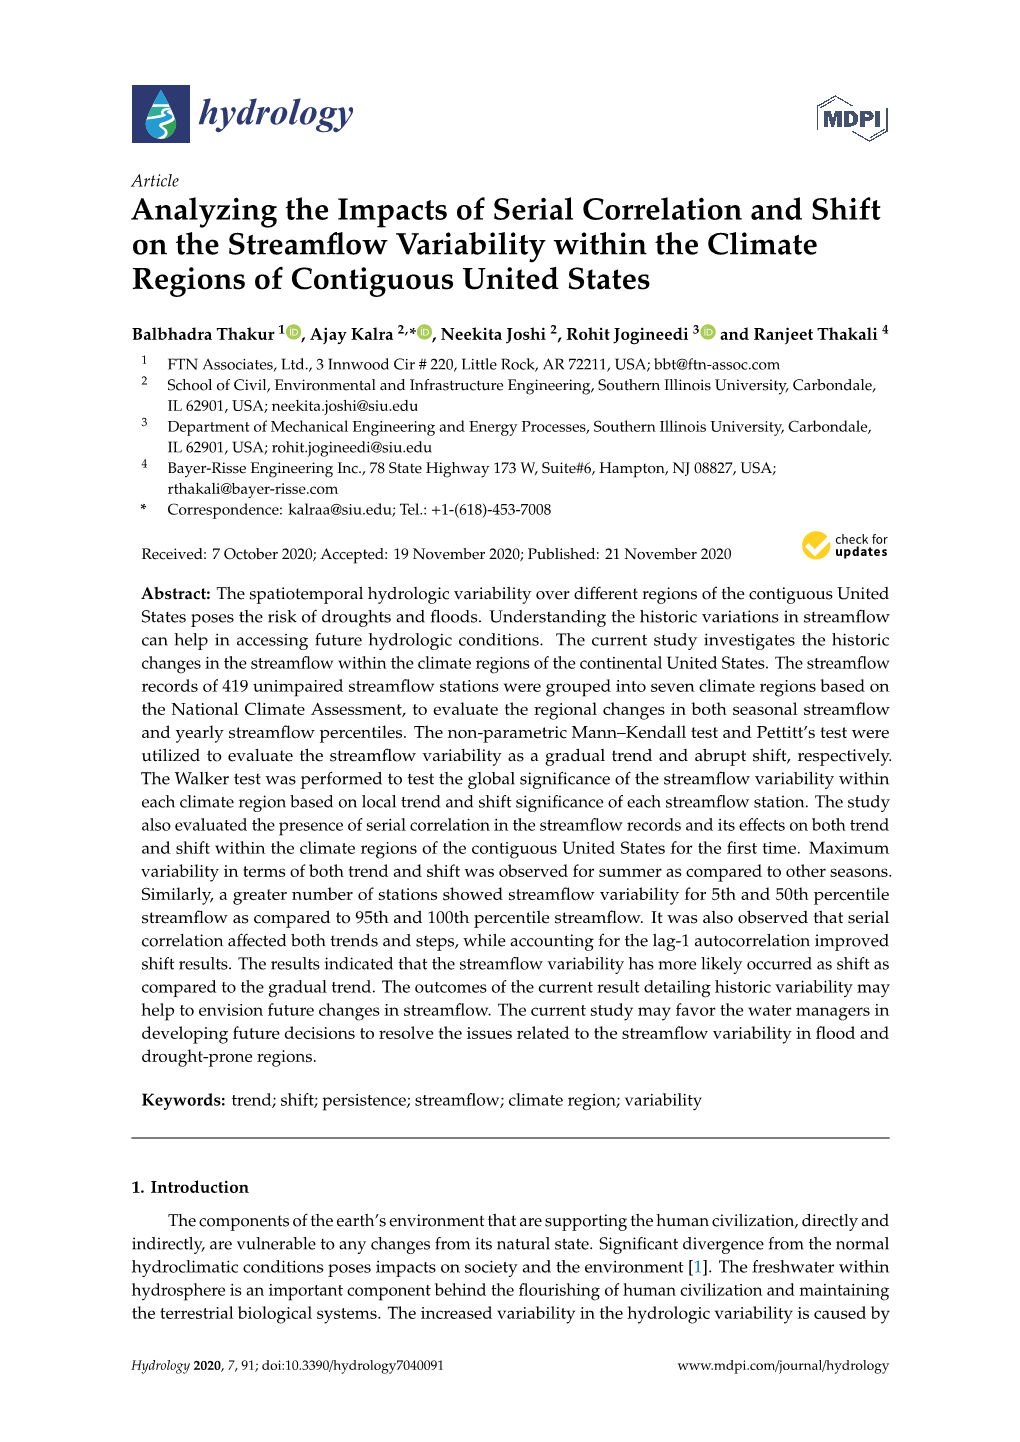 Analyzing the Impacts of Serial Correlation and Shift on the Streamflow Variability Within the Climate Regions of Contiguous